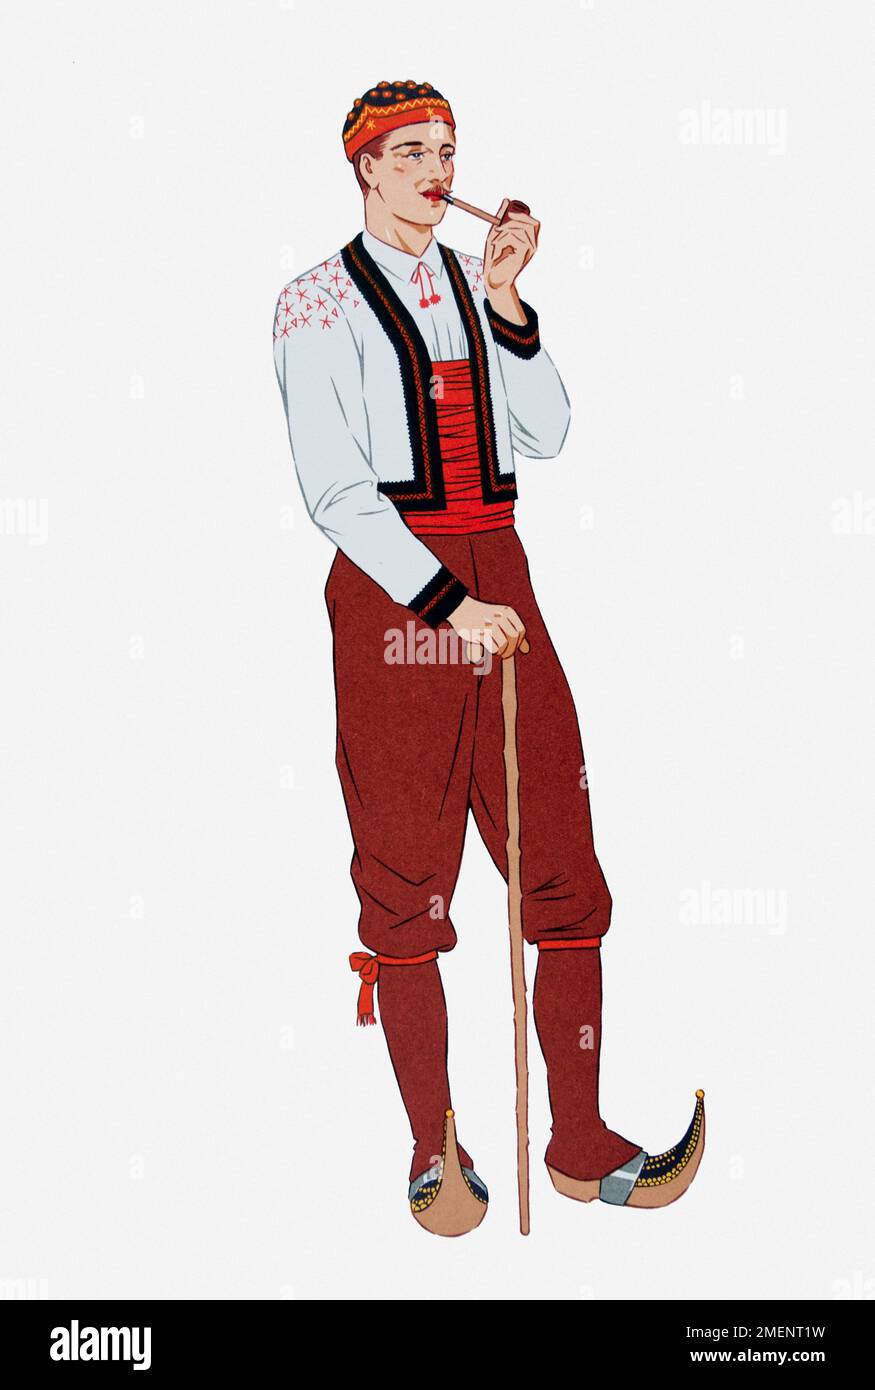 Illustration of man wearing traditional costume from French Pyrenees region Stock Photo